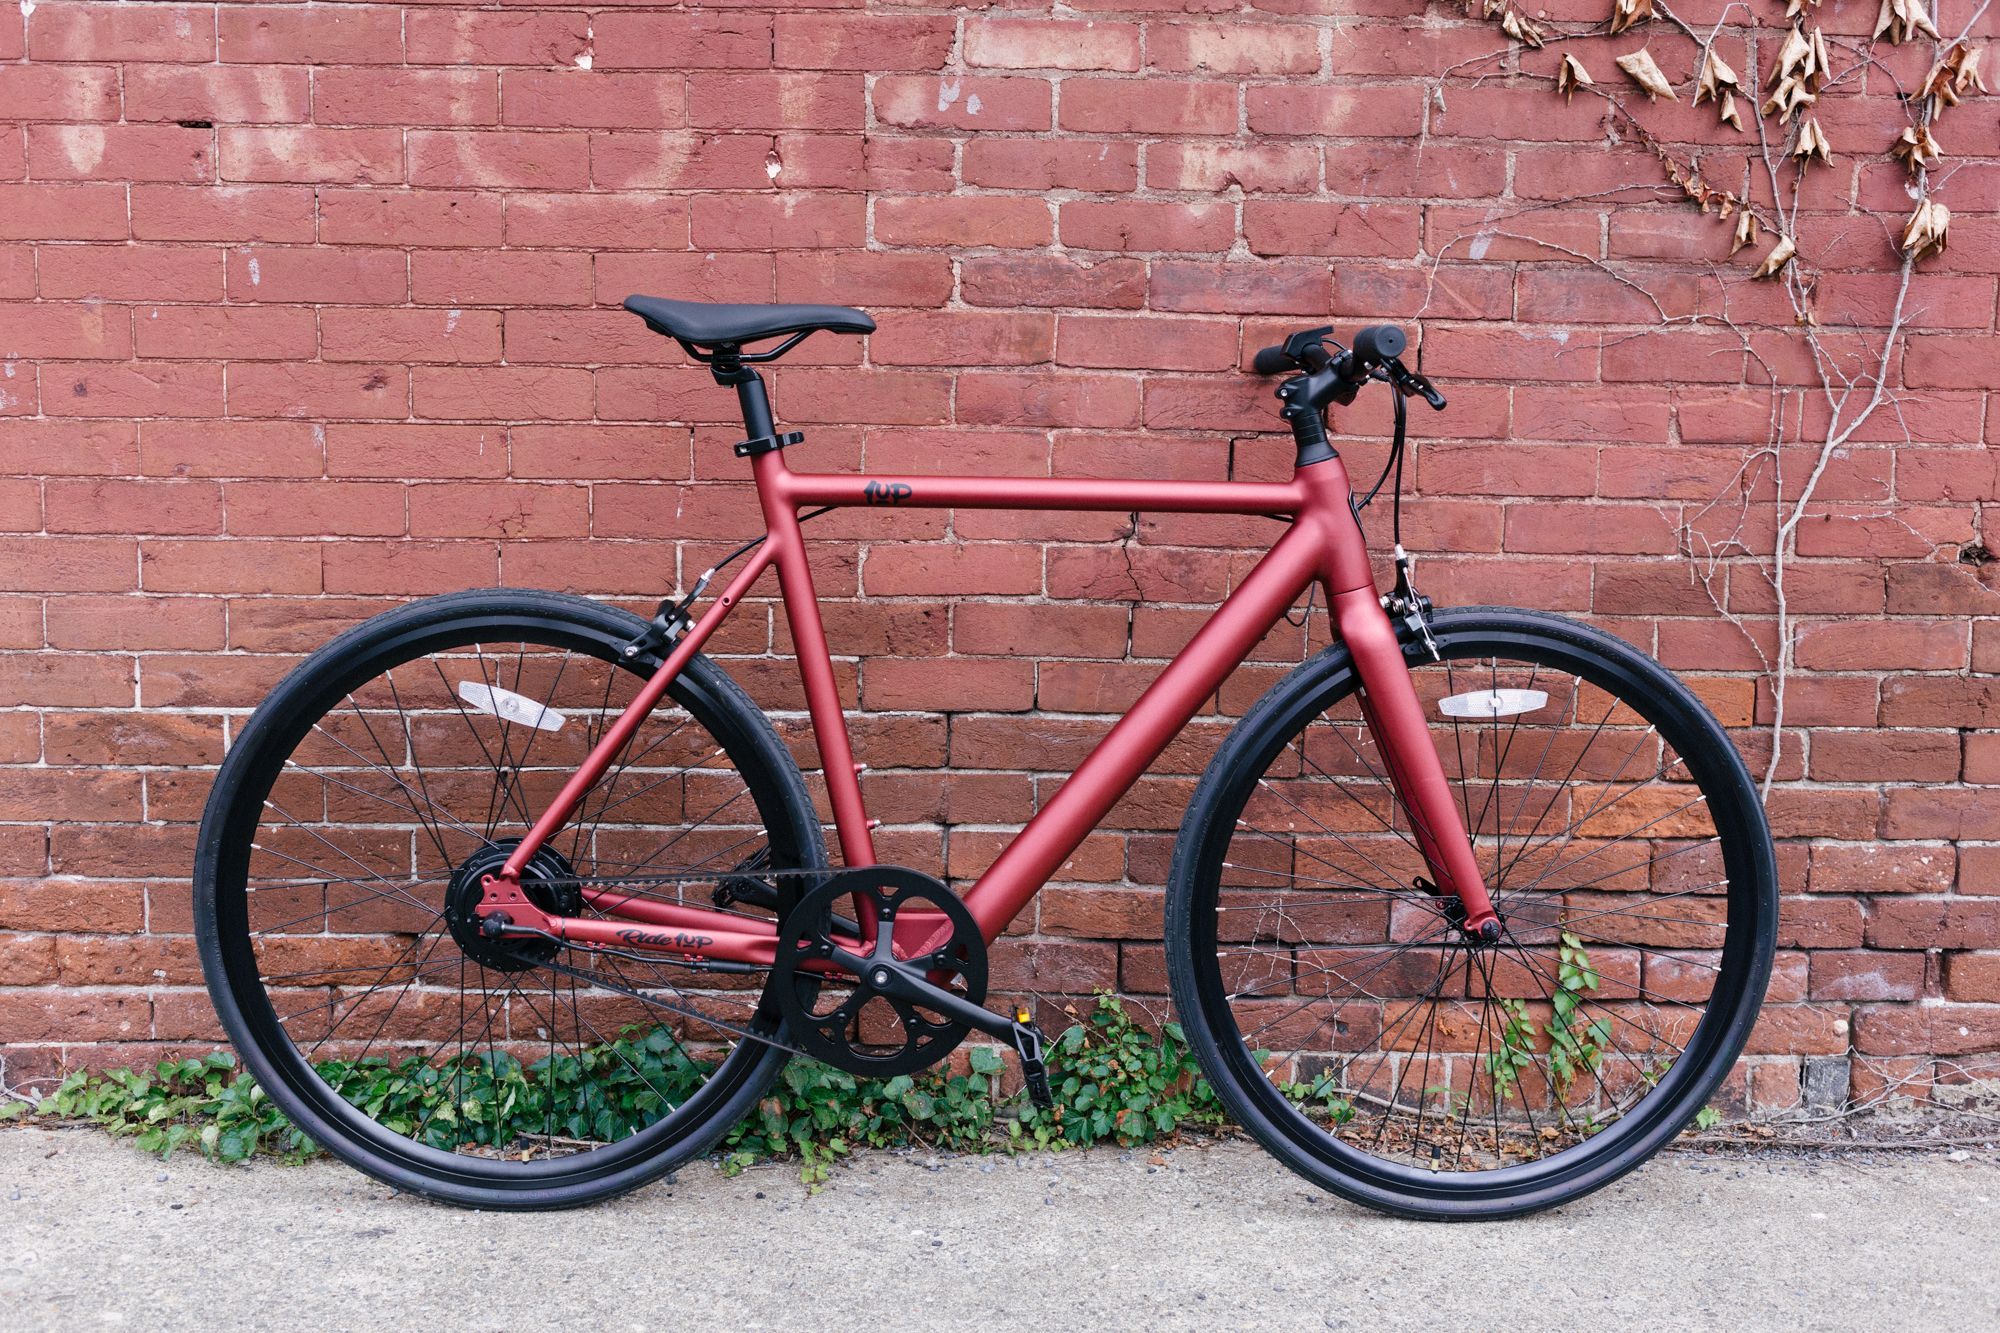 Burgundy Ride1Up ROADSTER V2 electric road bike rests against red brick wall in urban area